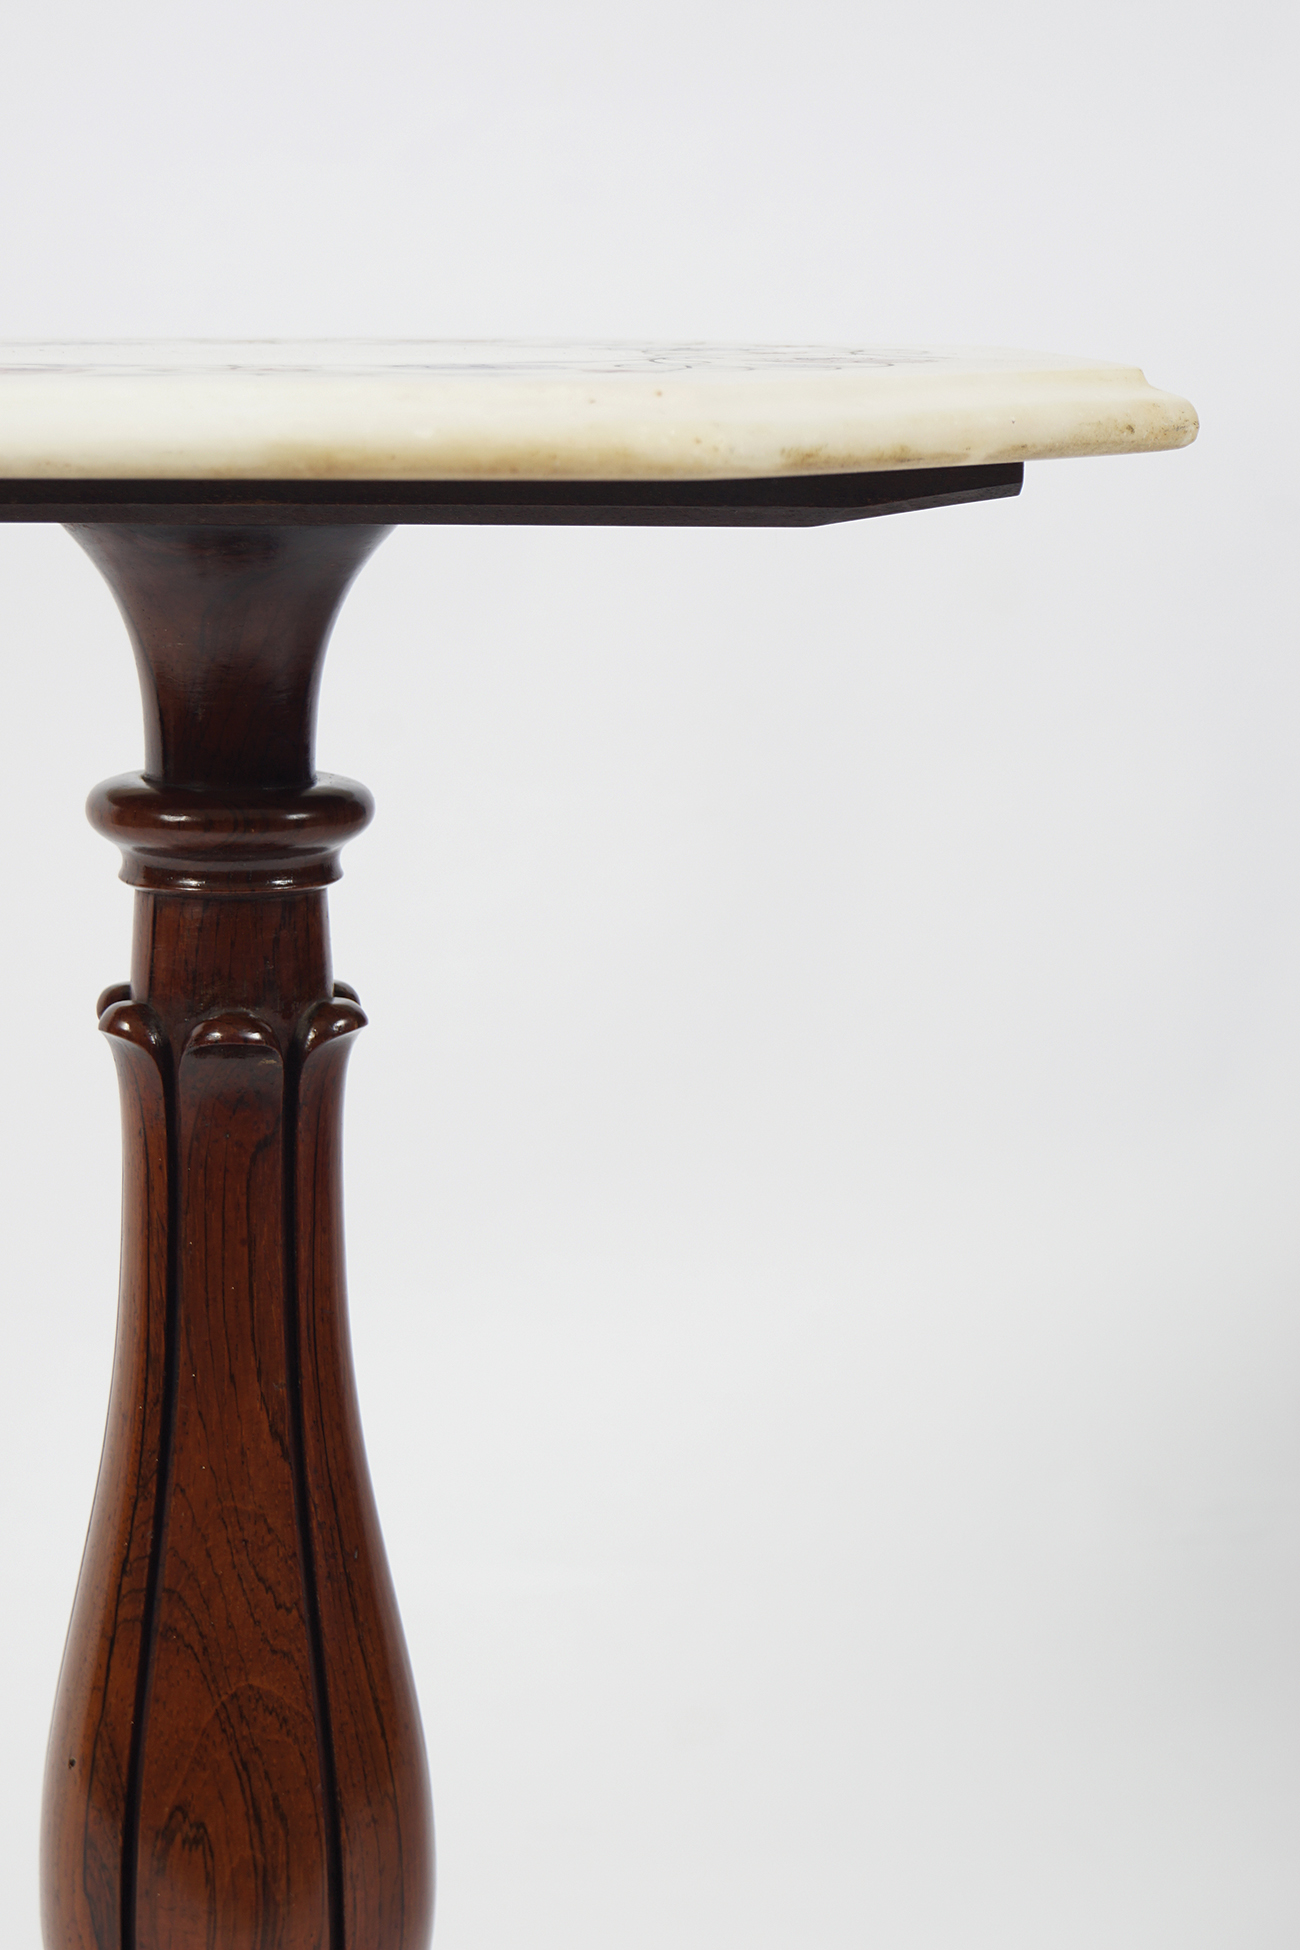 19TH-CENTURY SPECIMEN MARBLE AND ROSEWOOD TABLE - Image 5 of 5